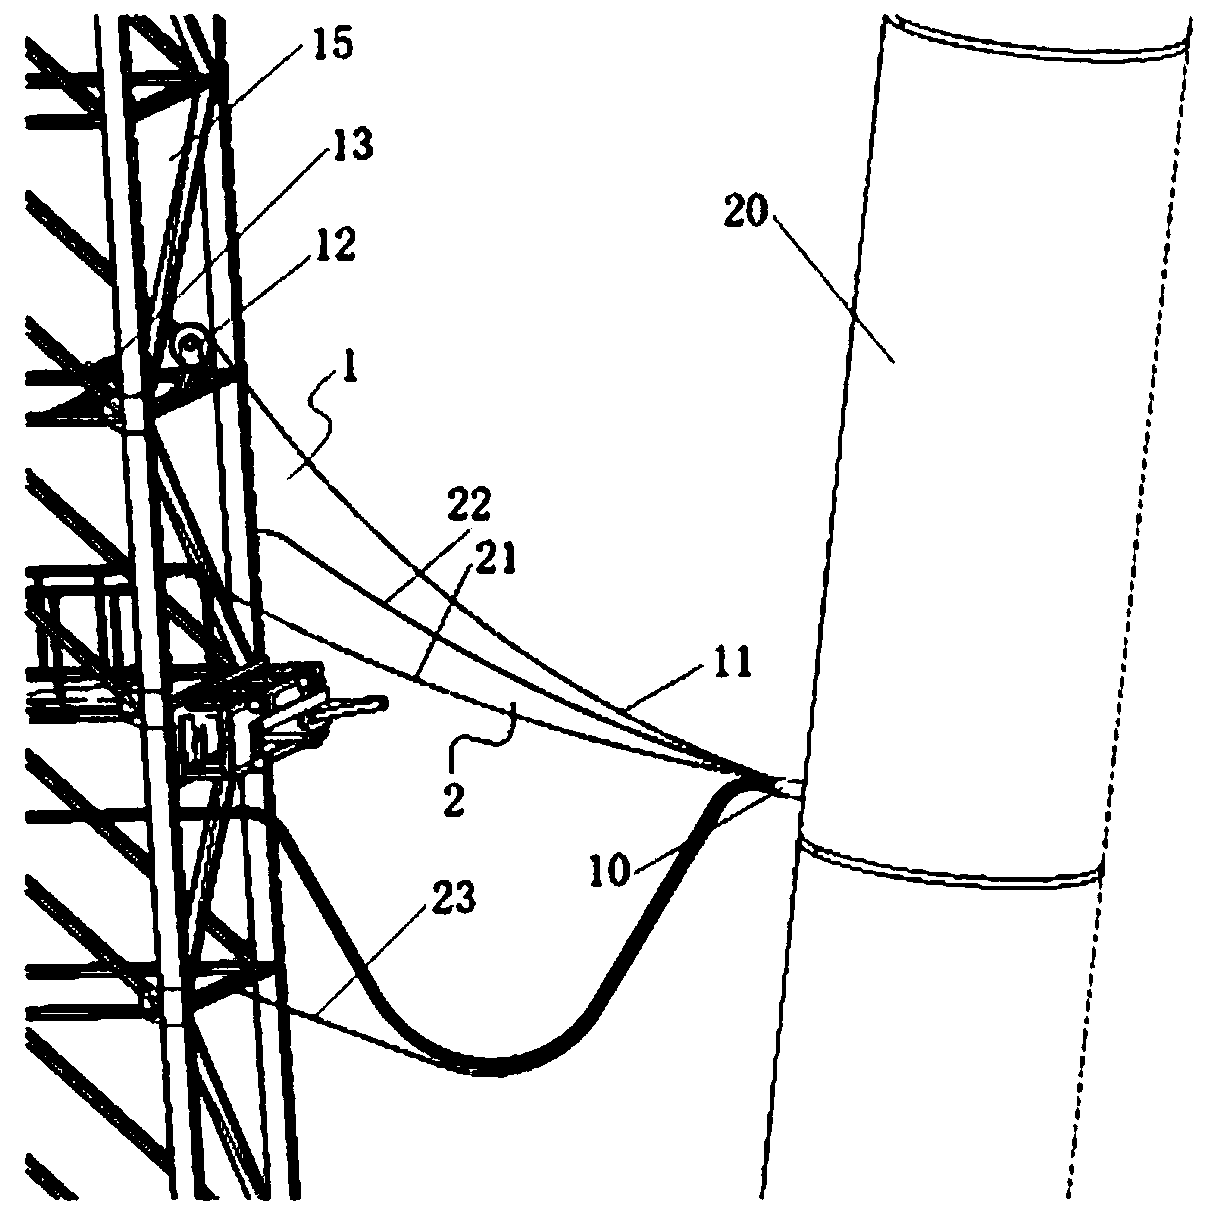 Fall-off hold-down system for carrier rocket and injection connector